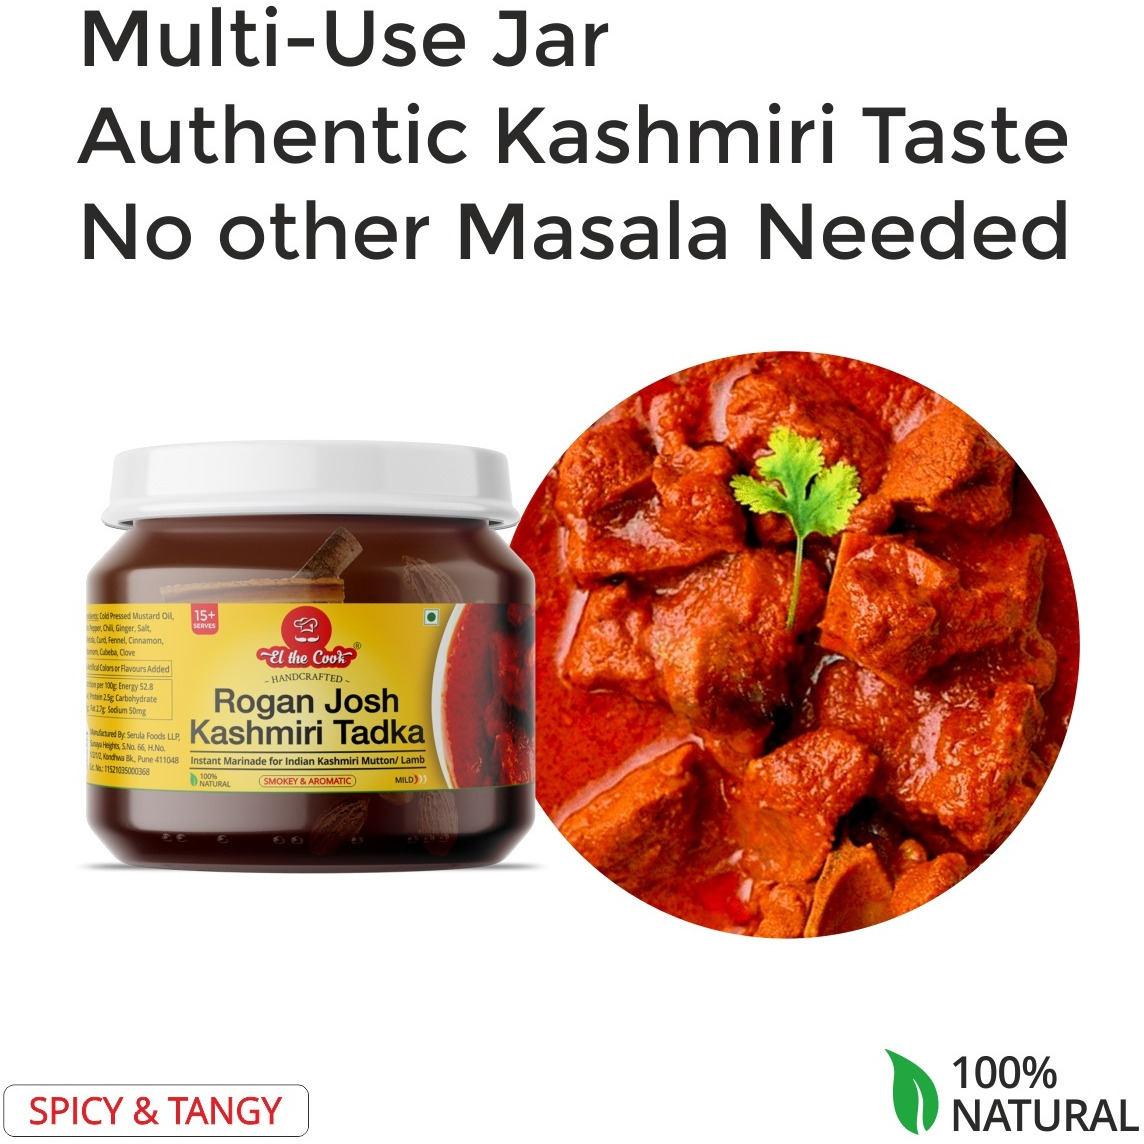 EL The Cook Ready-to-Use Tadka(CONCENRATED Whole Spice Tempering) for Kashmiri Meals, Indian Meat Marinade & Rice Seasoning, Super Saver COMBO Pack, 12.68oz, Vegetarian, Gluten-Free (Flavor: Kashmiri Combo - 2 Pack)